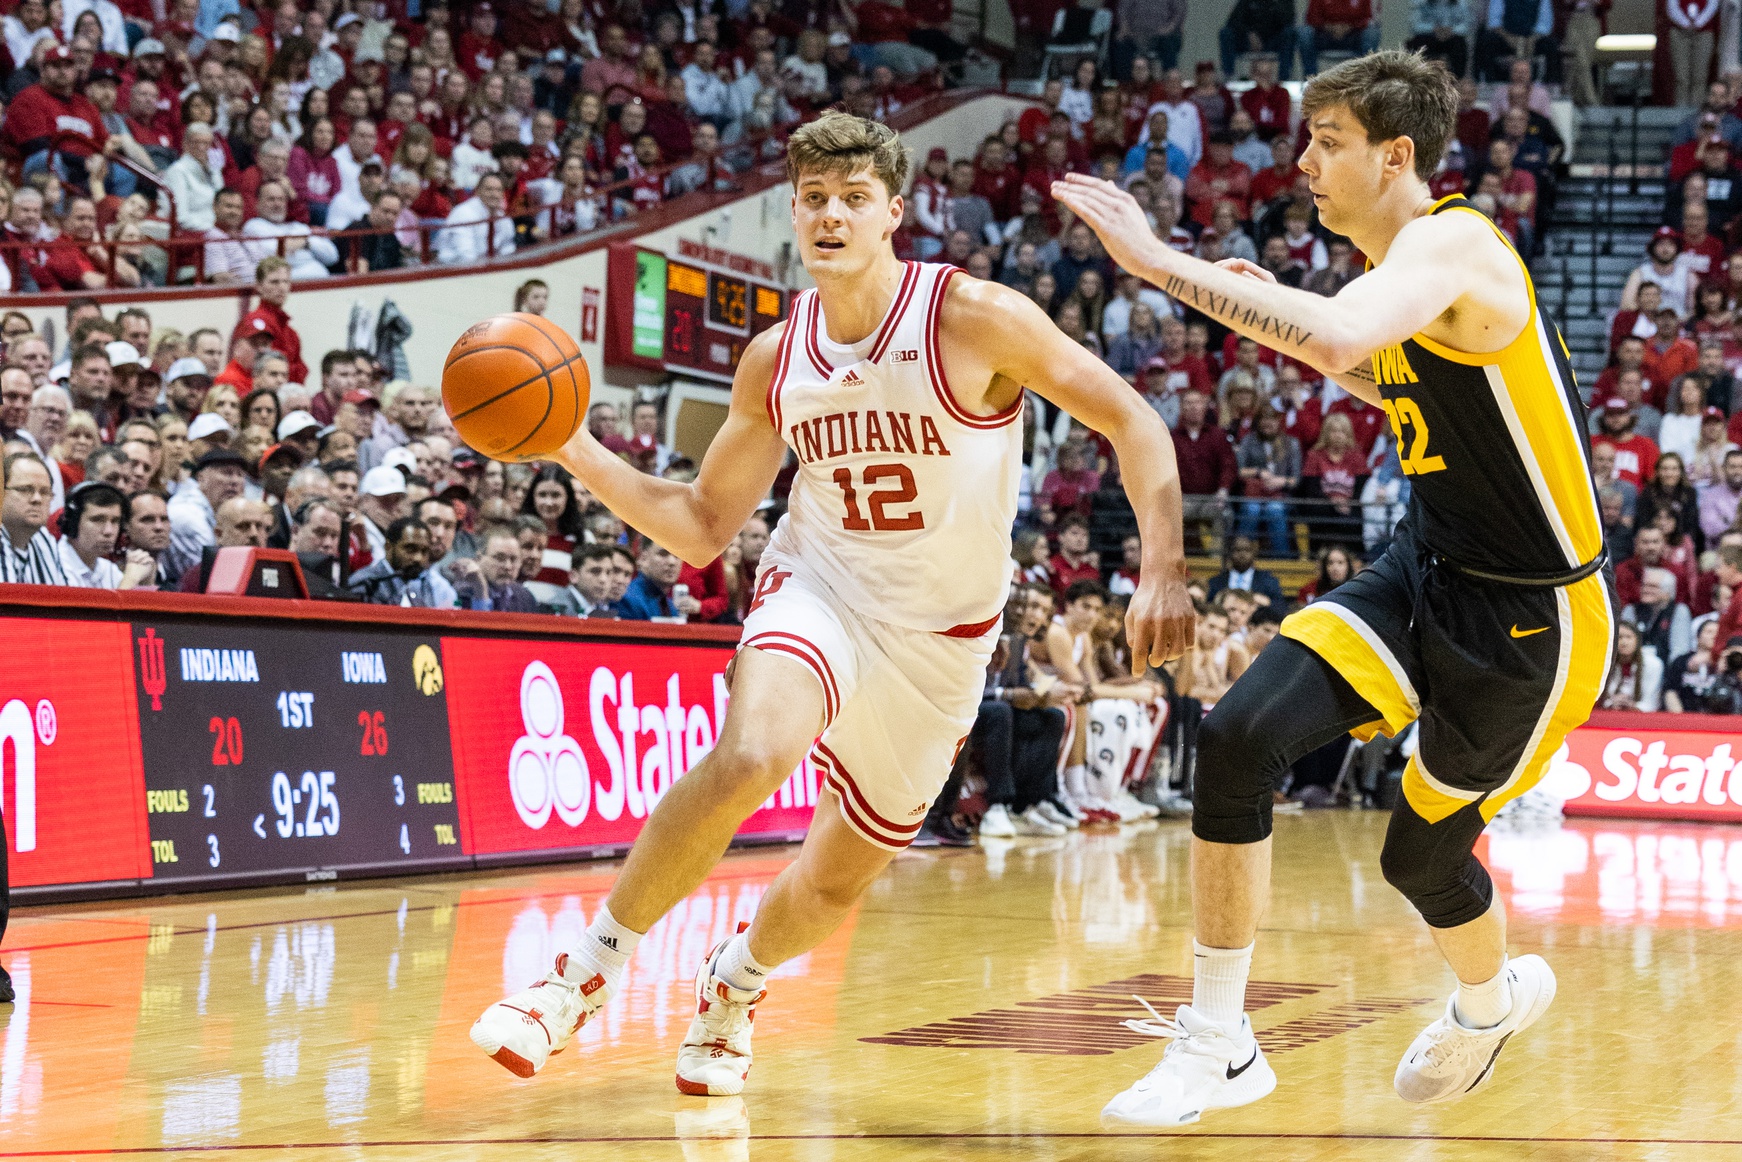 Indiana Hoosiers forward Miller Kopp (12) passes the ball while Iowa Hawkeyes forward Patrick McCaffery (22) defends in the first half at Simon Skjodt Assembly Hall.